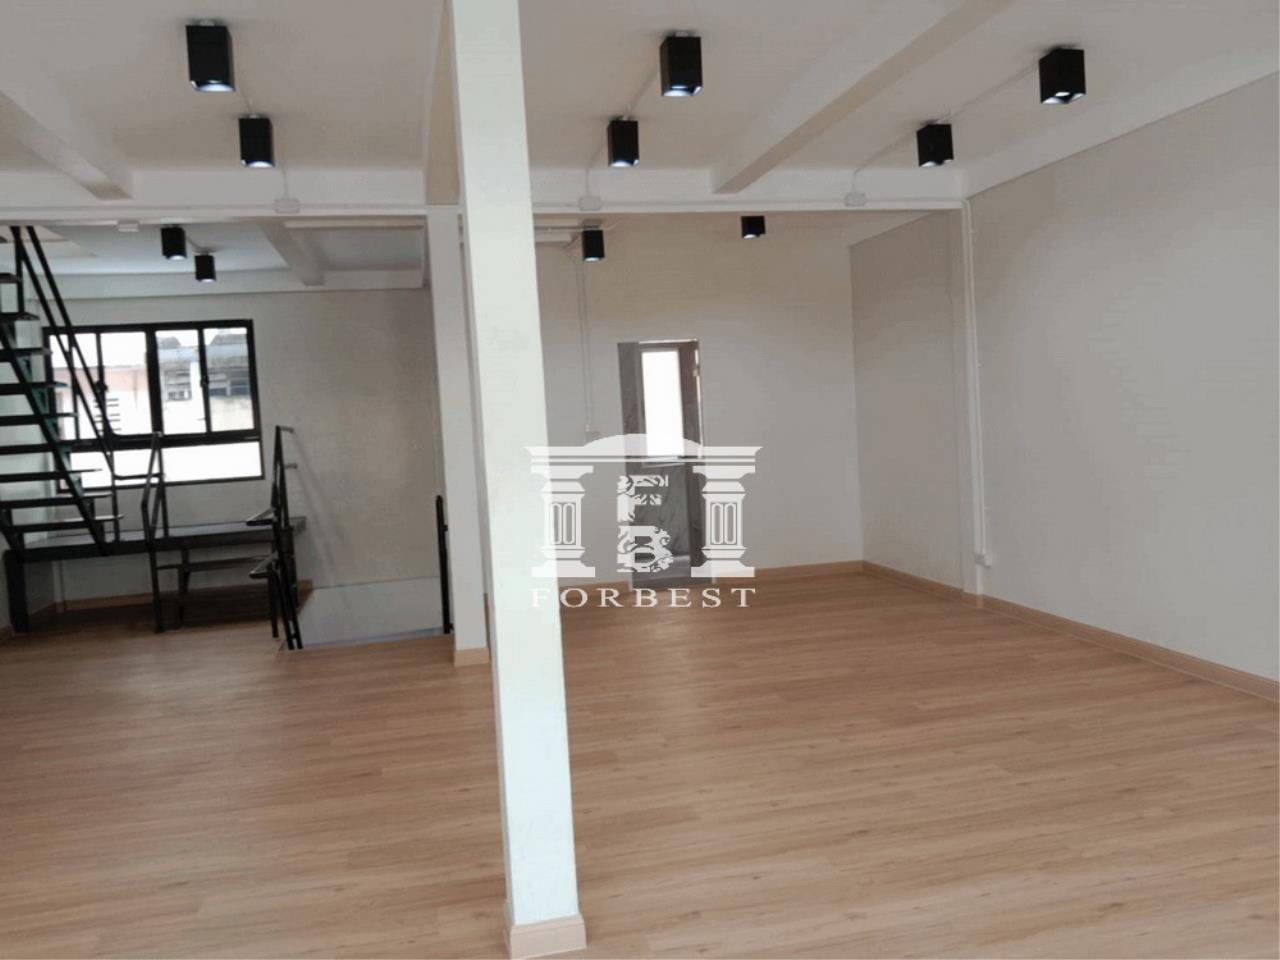 Forbest Properties Agency's 90499 - Sathupradit Rd., 4 storey Shophouse for sale, usable area 340 Sq.m. 3